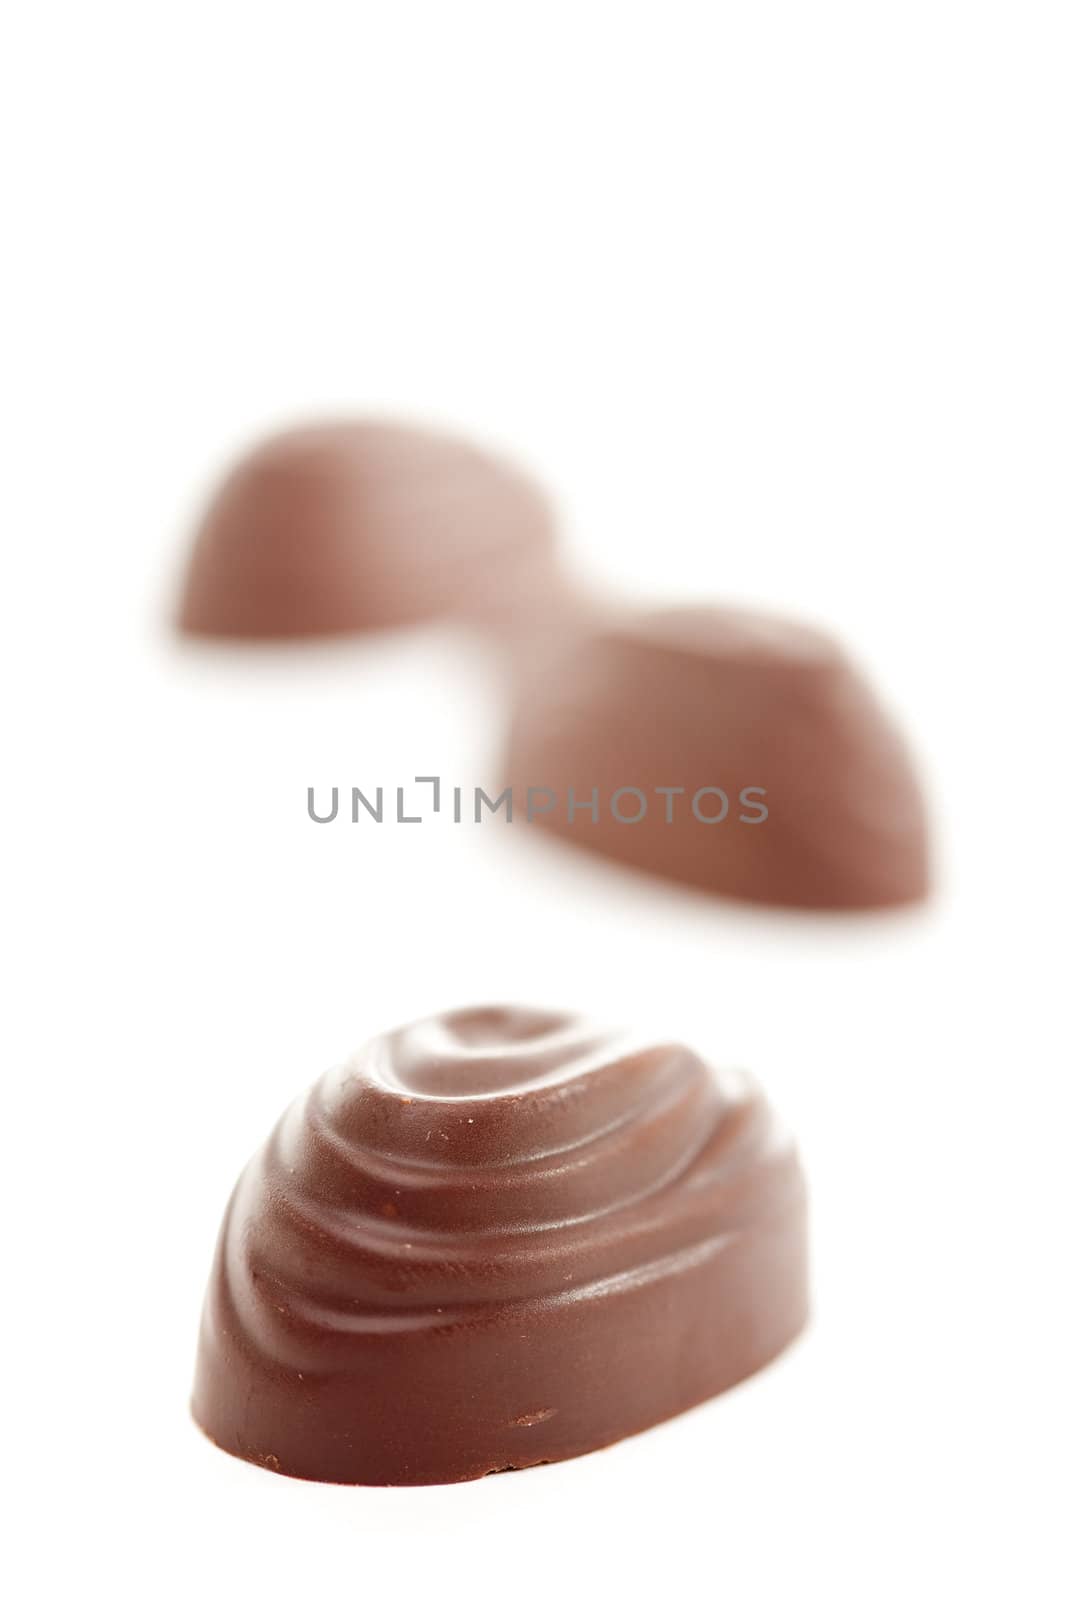 Delicious Chocolates Isolated on a White Background.
